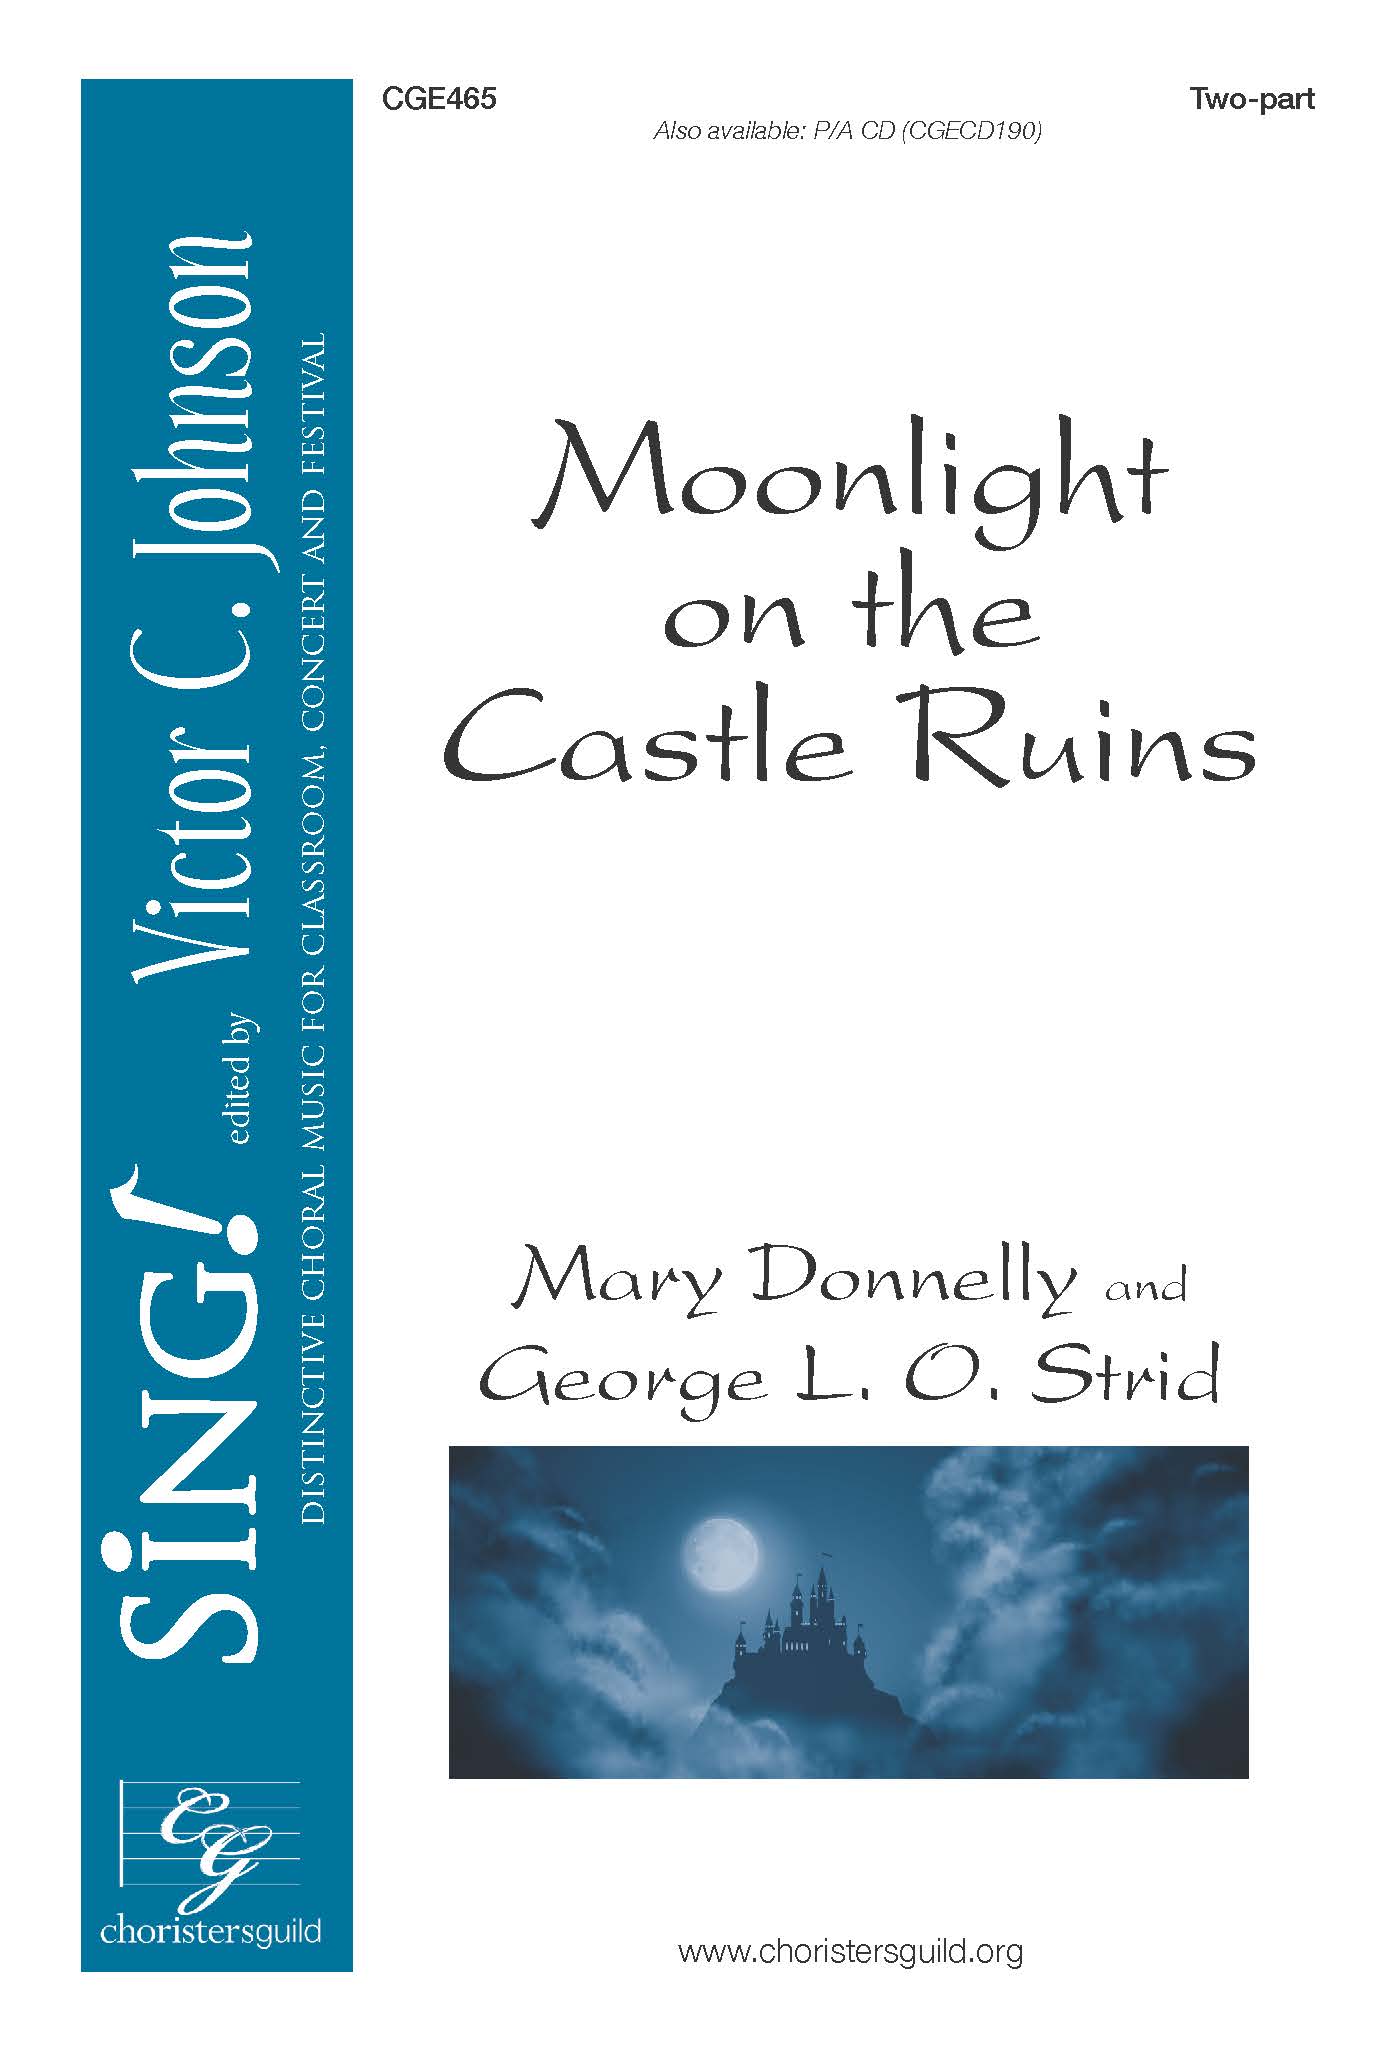 Moonlight on the Castle Ruins - Two-part